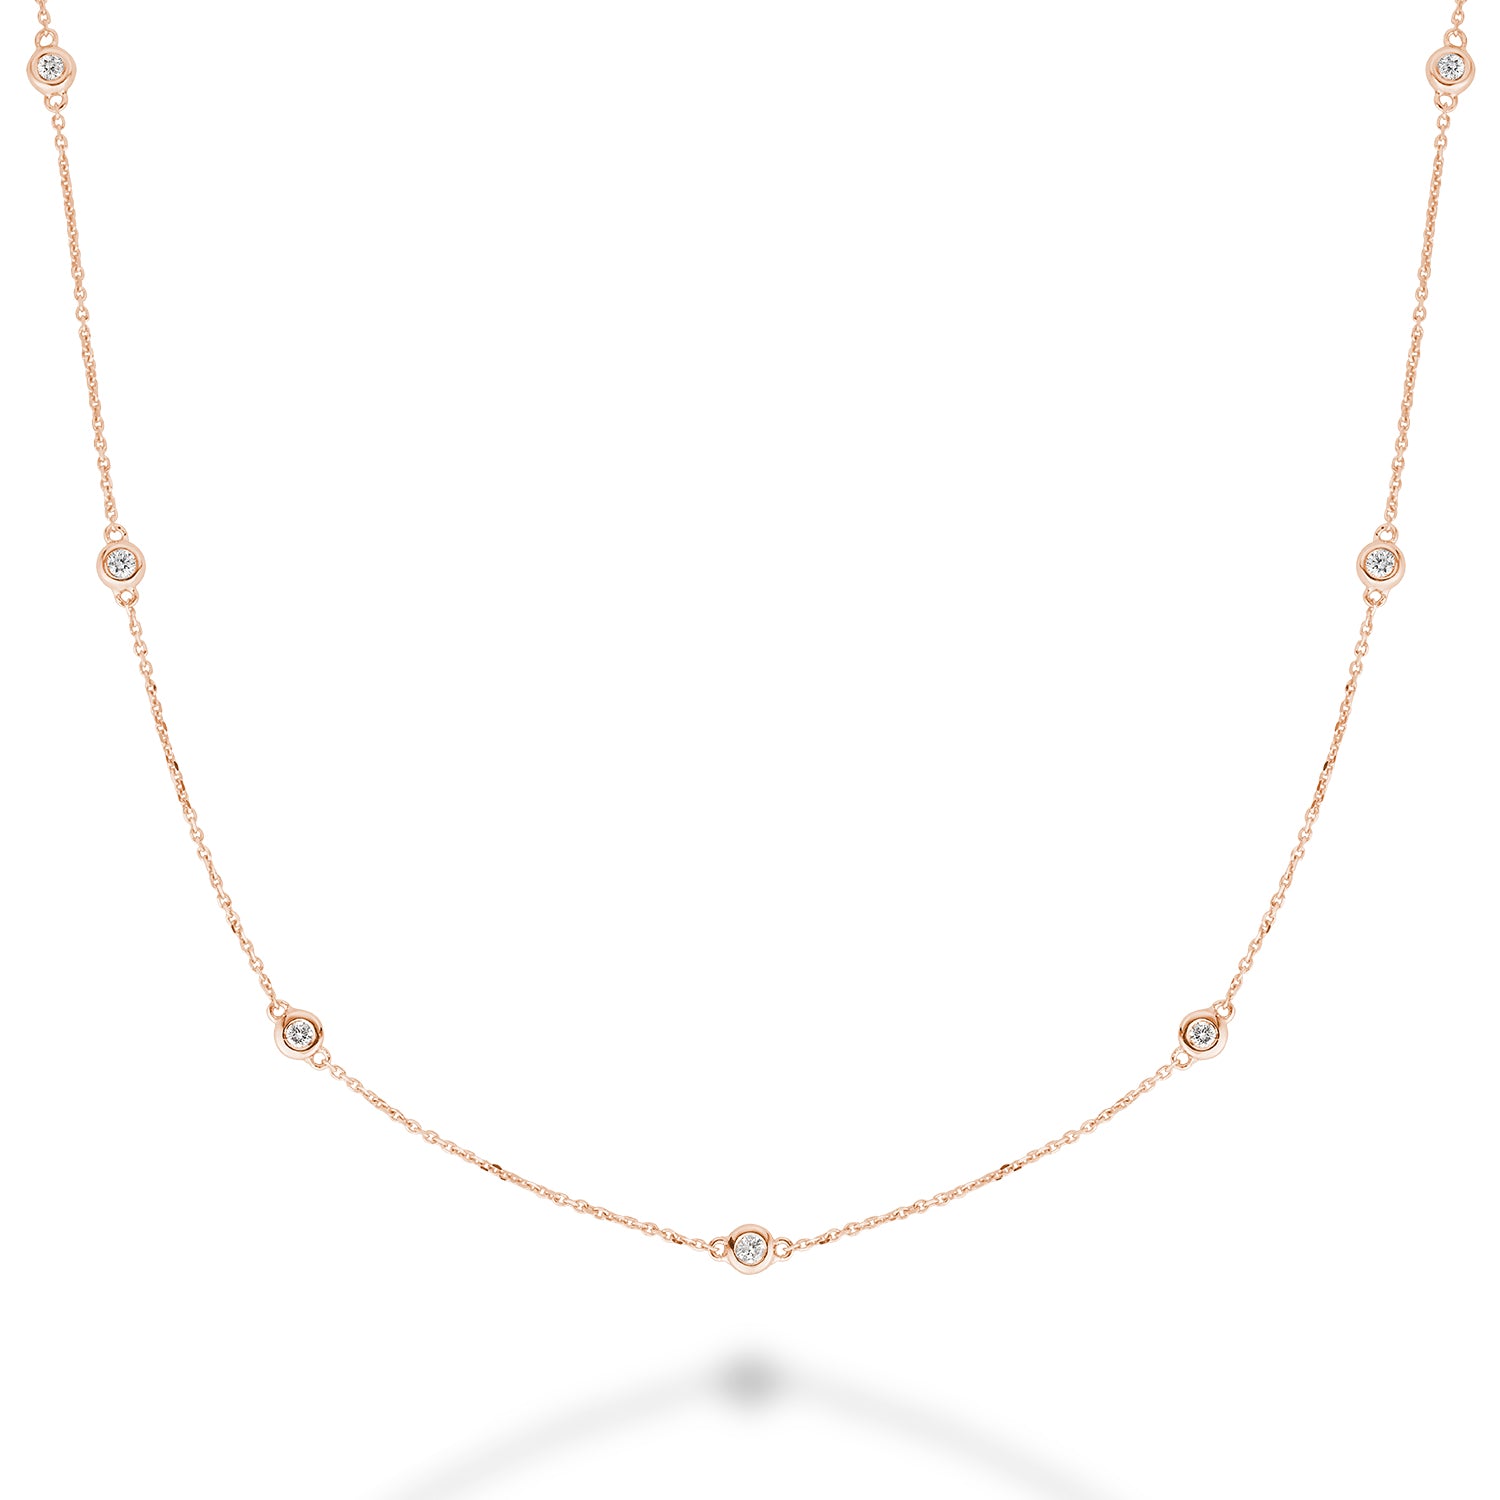 Hemsleys Collection 14K Diamonds-By-The-Yard Necklace